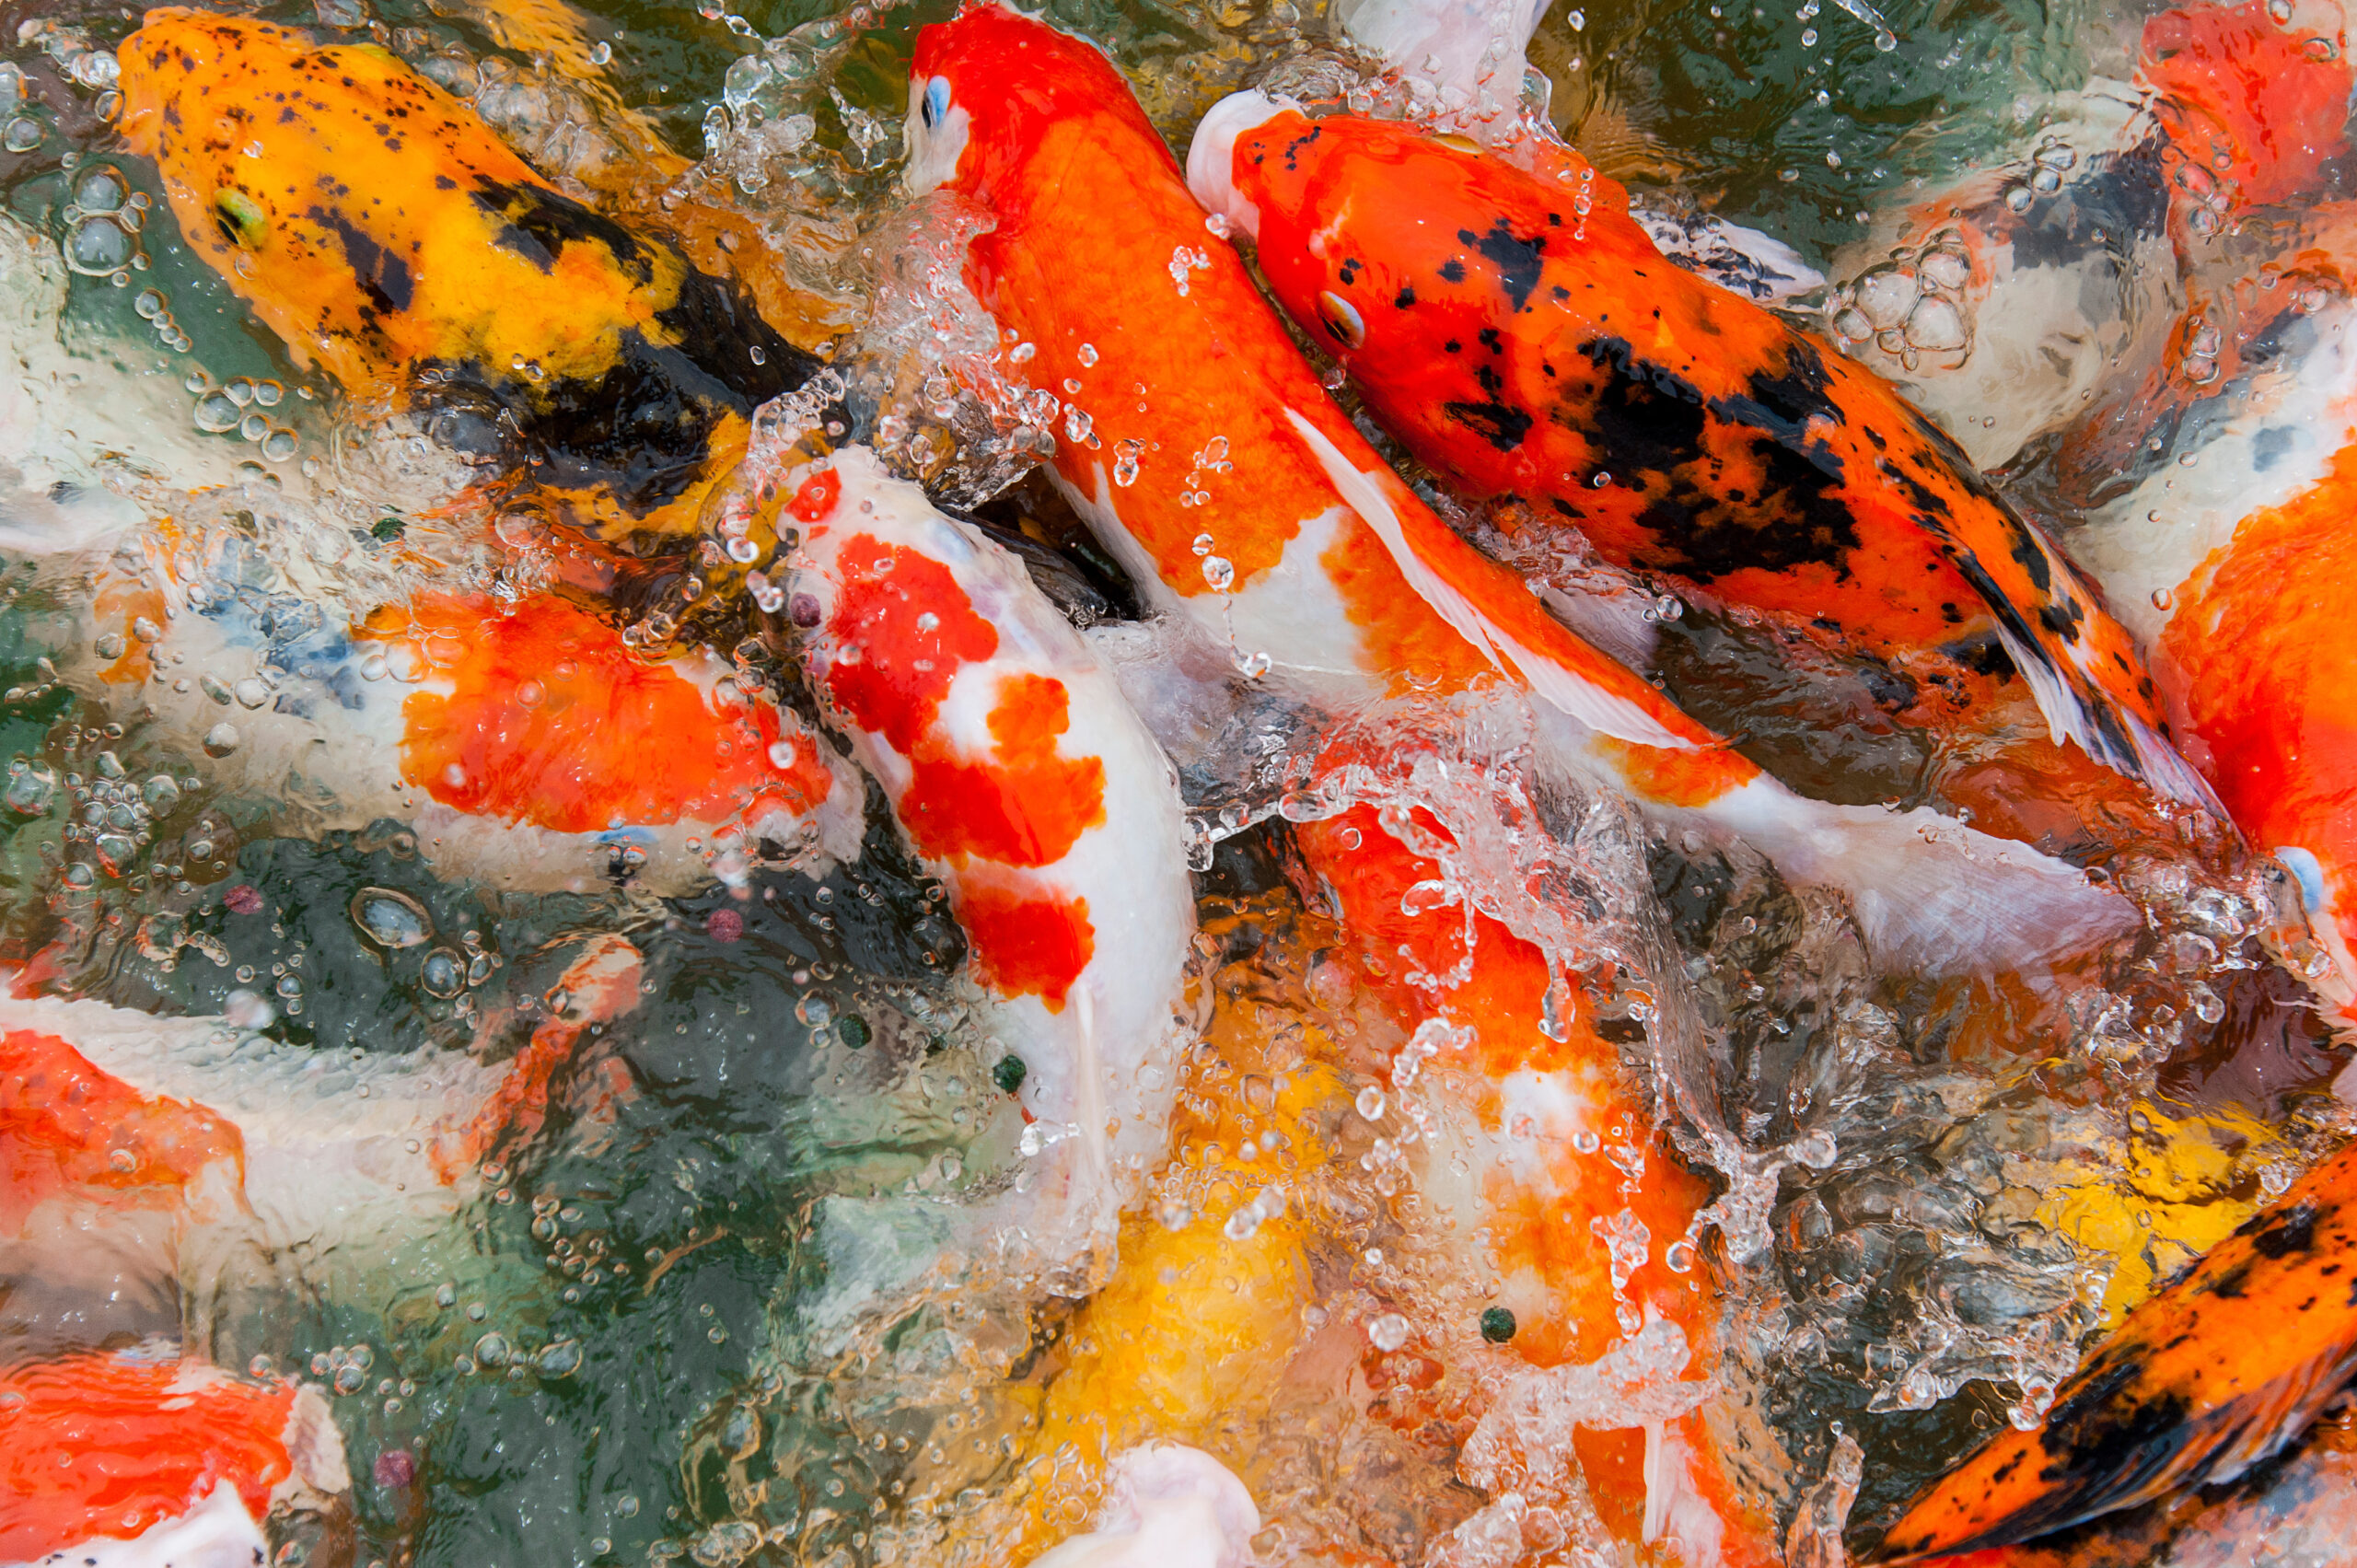 Koi fish swimming gracefully in a pool, displaying their vibrant and colorful scales, often associated with beauty and tranquility in aquatic settings.